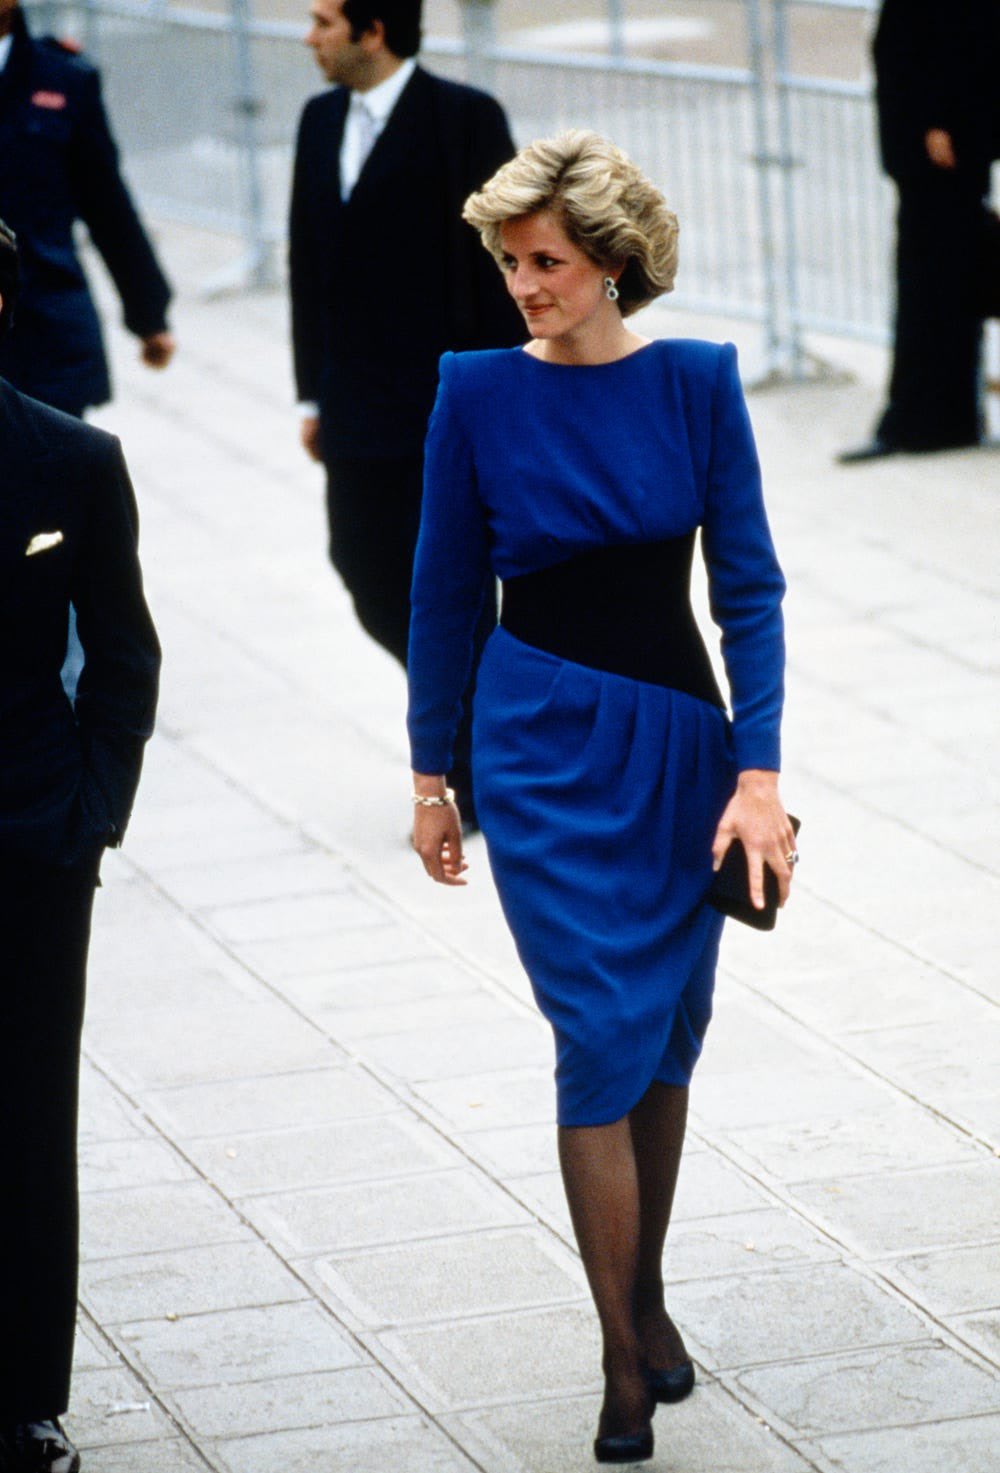 Princess Diana as SEC Schools, based on color and vibe (courtesy of @AlexMcDaniel on Twitter)